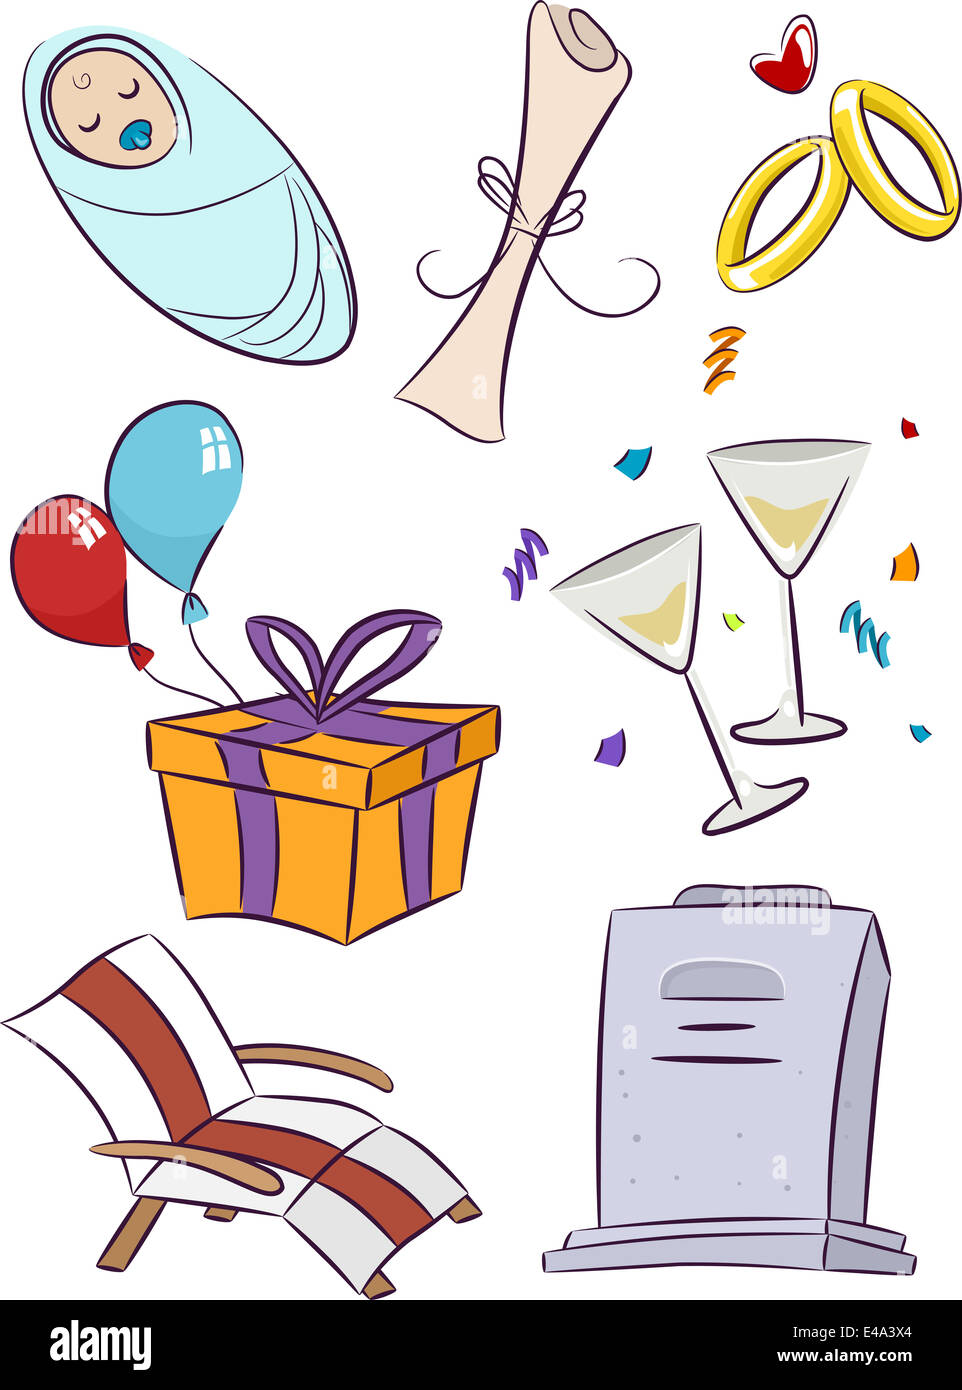 Illustration Featuring Elements Commonly Associated with Important Life Events Stock Photo